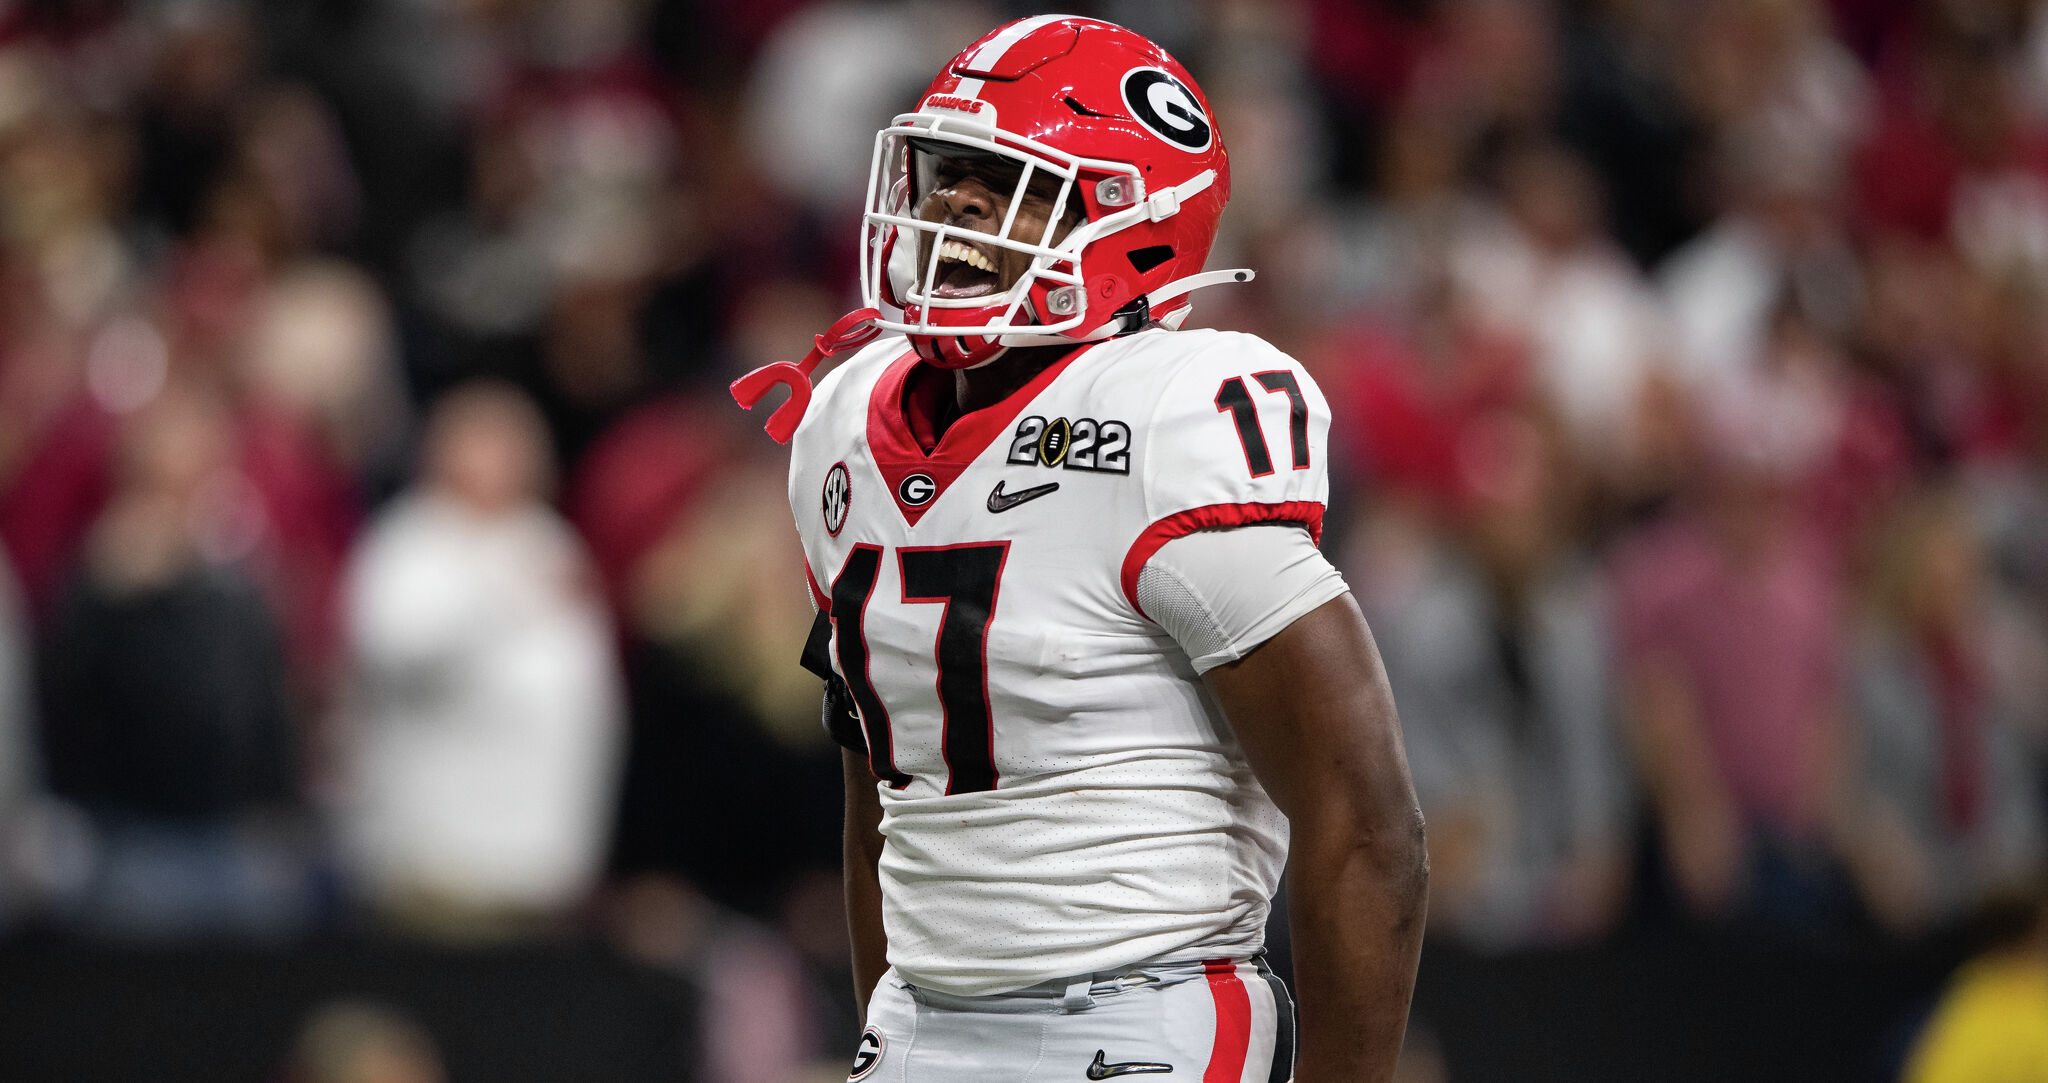 2022 NFL Draft preview: Scouting wide receivers and tight ends